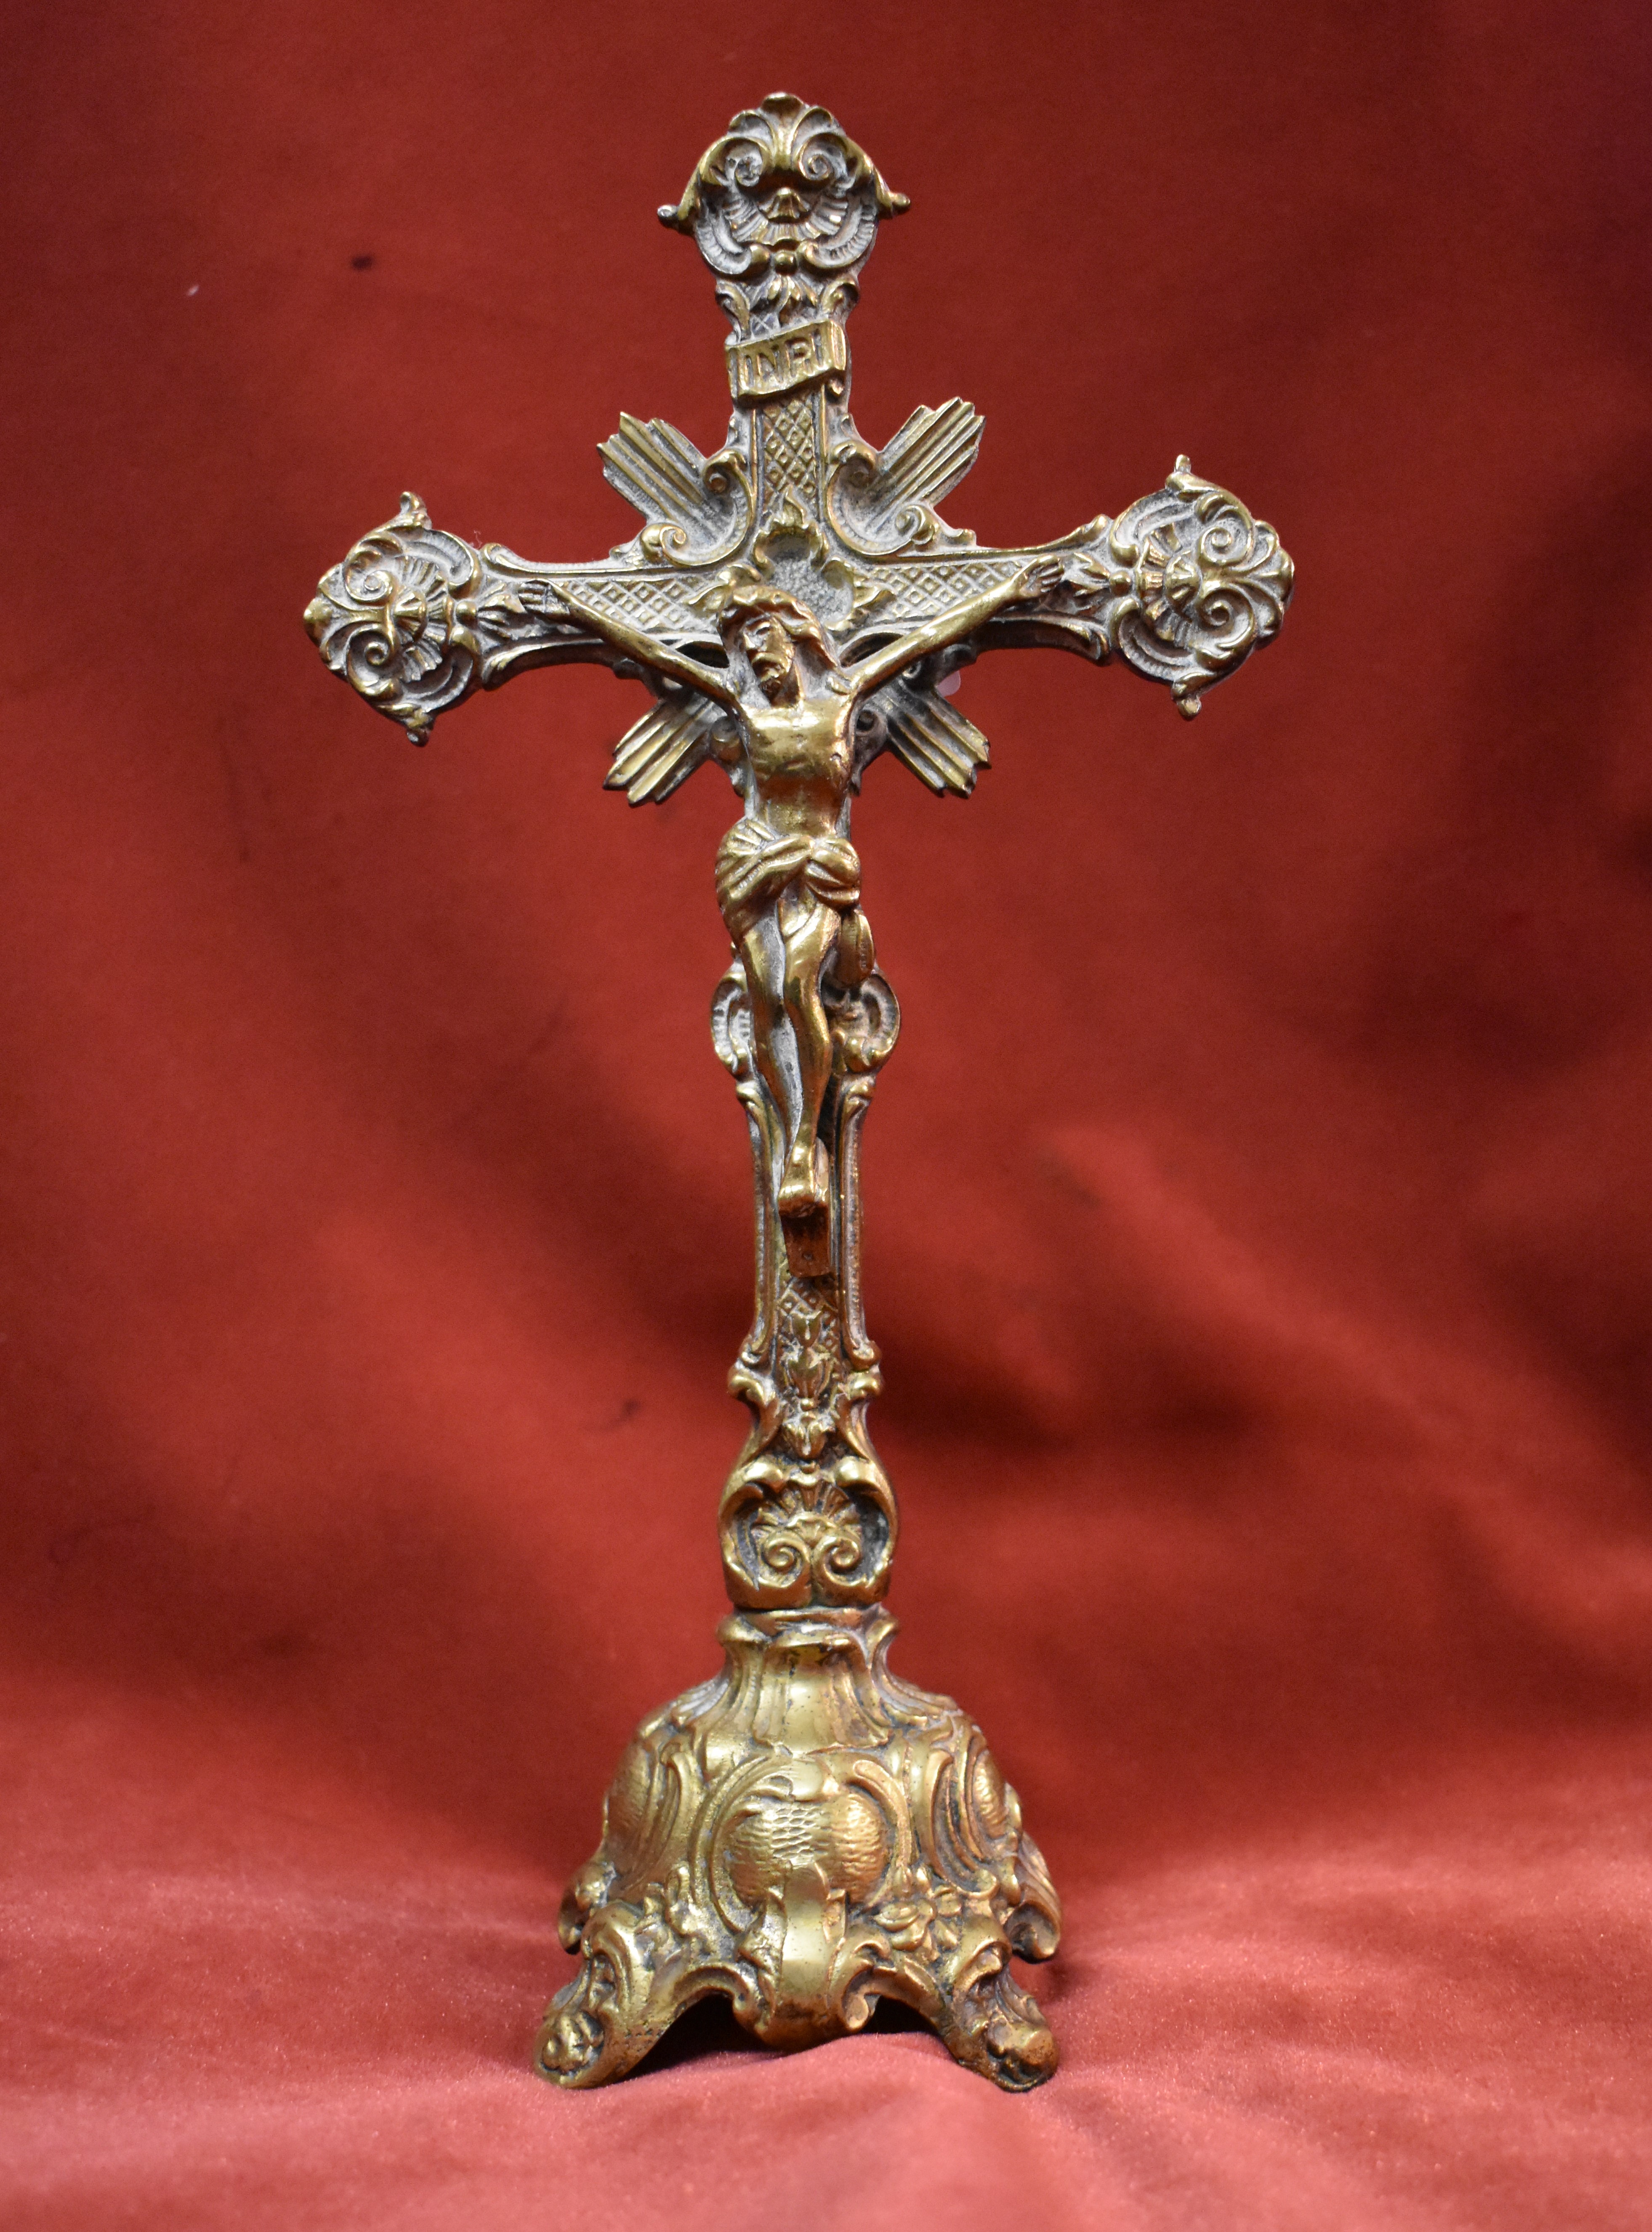 Orthodox Church Brass Footed Crucifix with an ornate floral design, maker marks on the back 'OSE'.